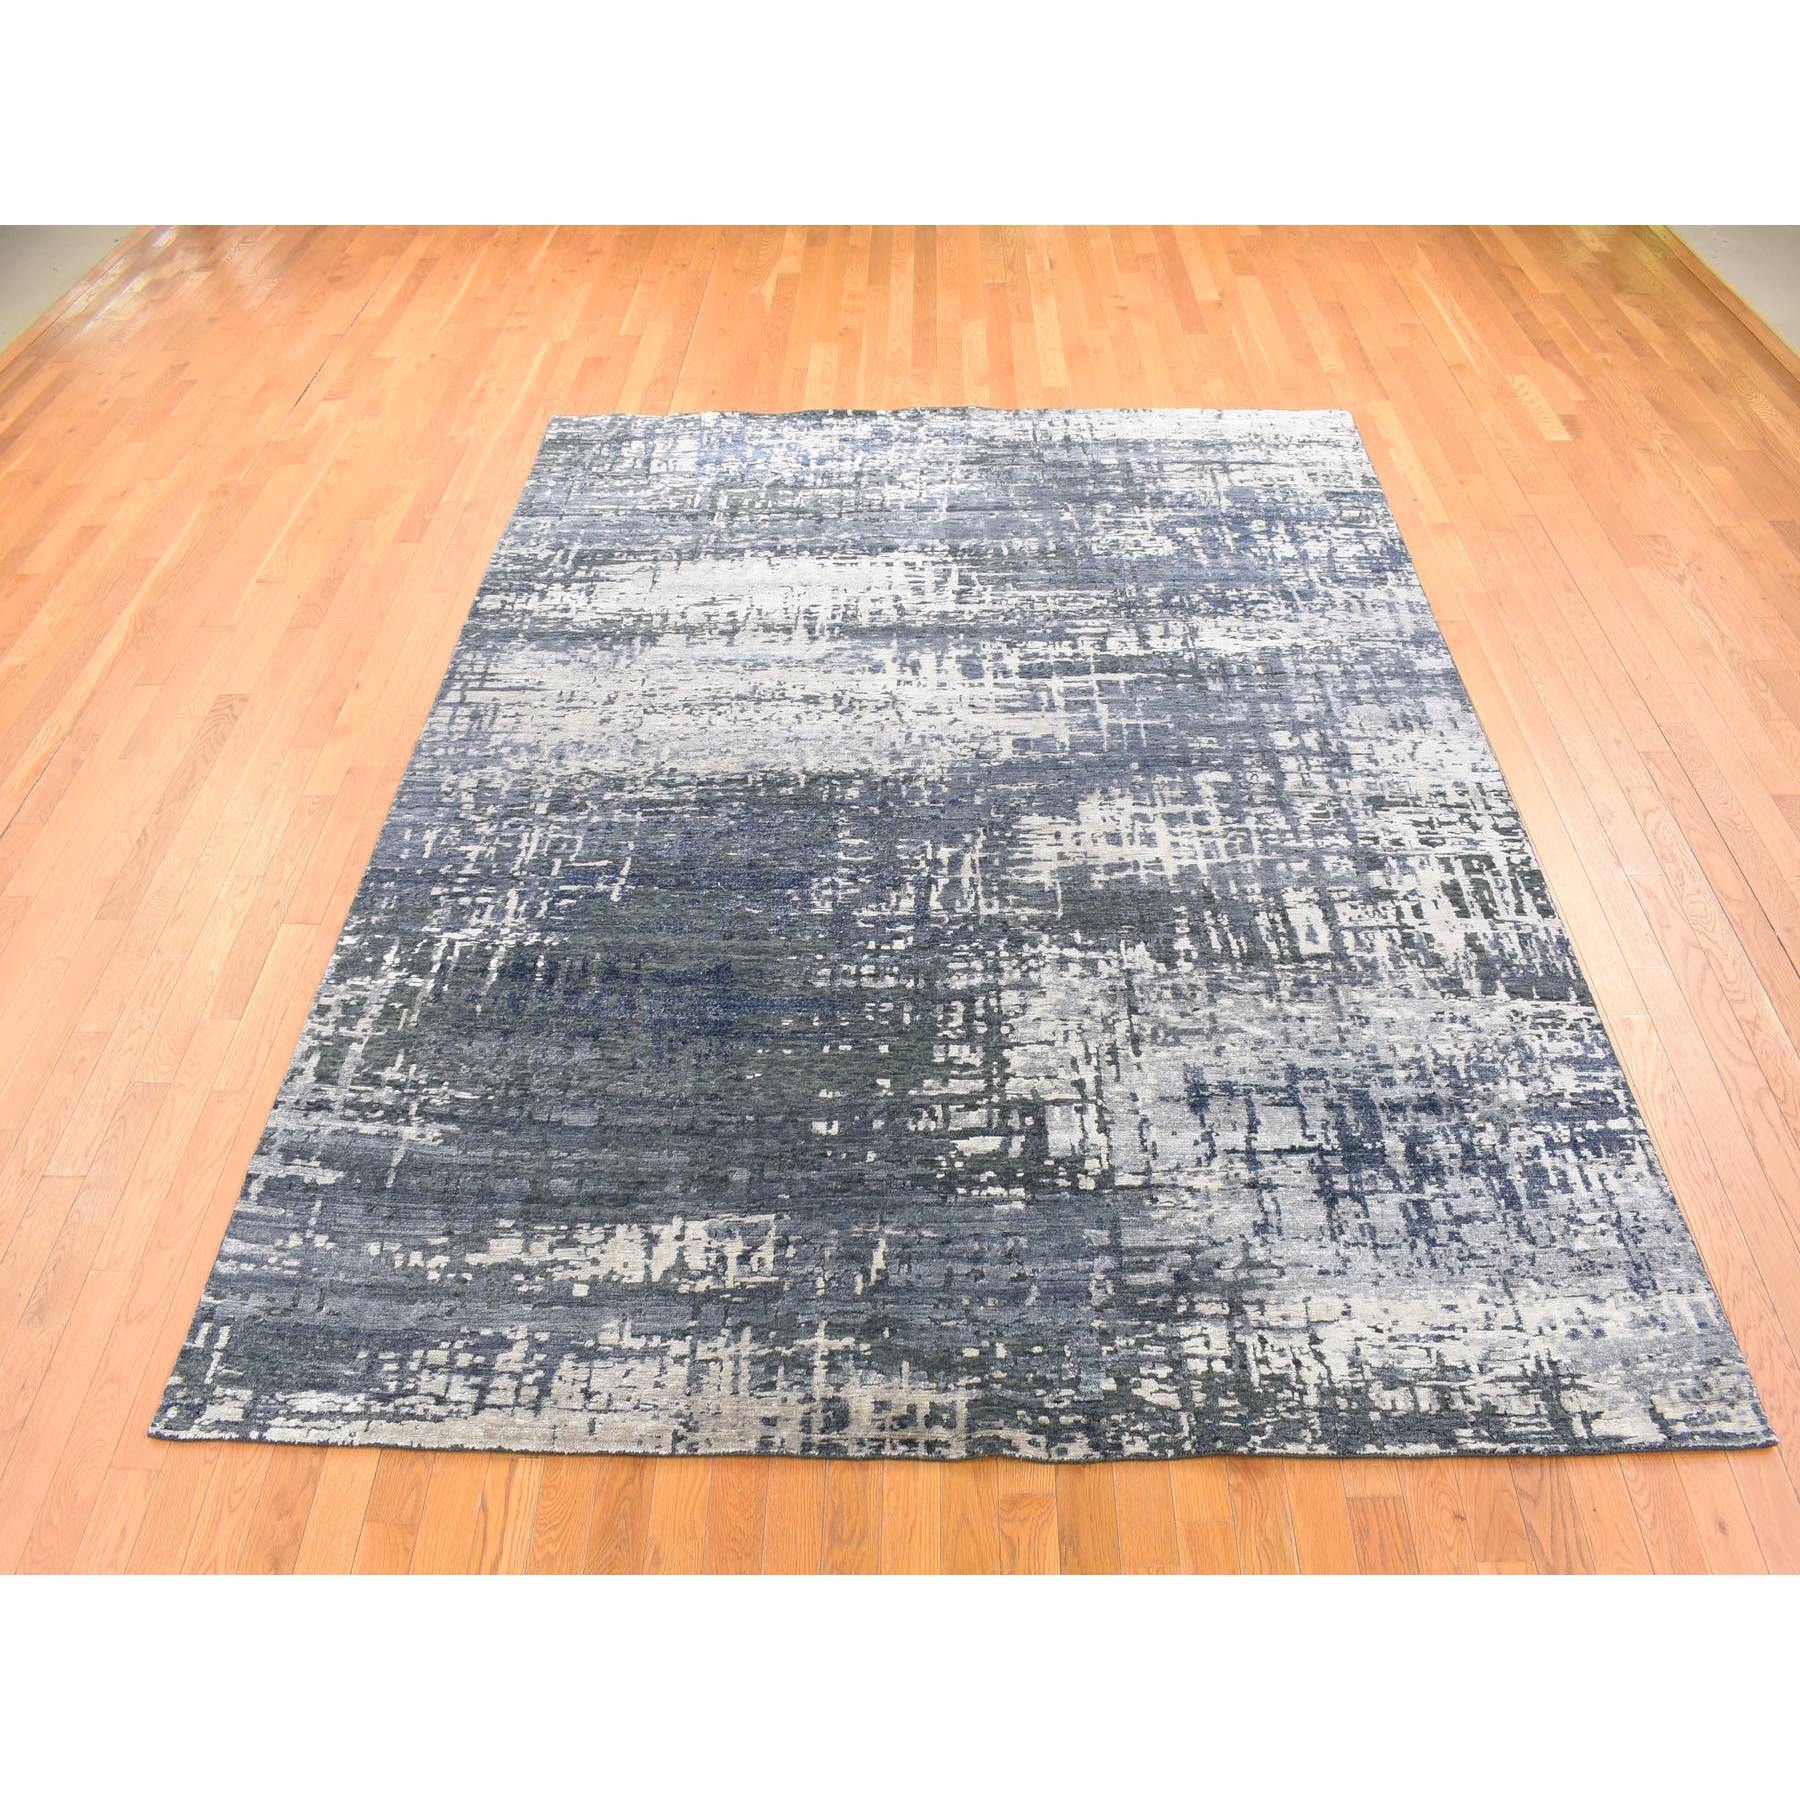 8'x10' Charcoal Black and Blue, Modern Design, Hand Woven, Wool with Plant Based Silk, Nepali, Oriental Rug 